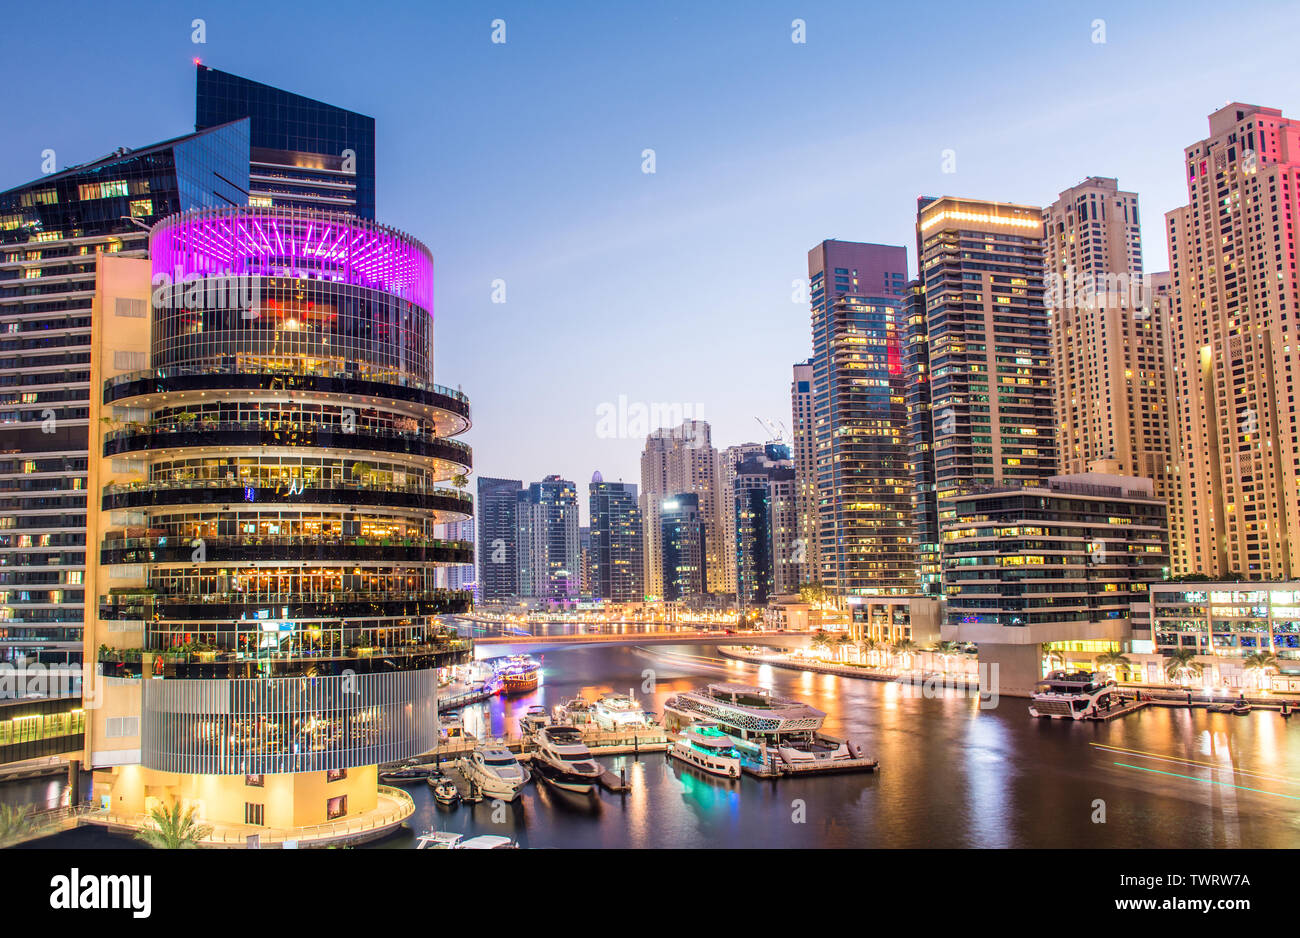 Dubai Marina Night view of modern buildings amazing architecture designs best place to visit in Middle east Stock Photo